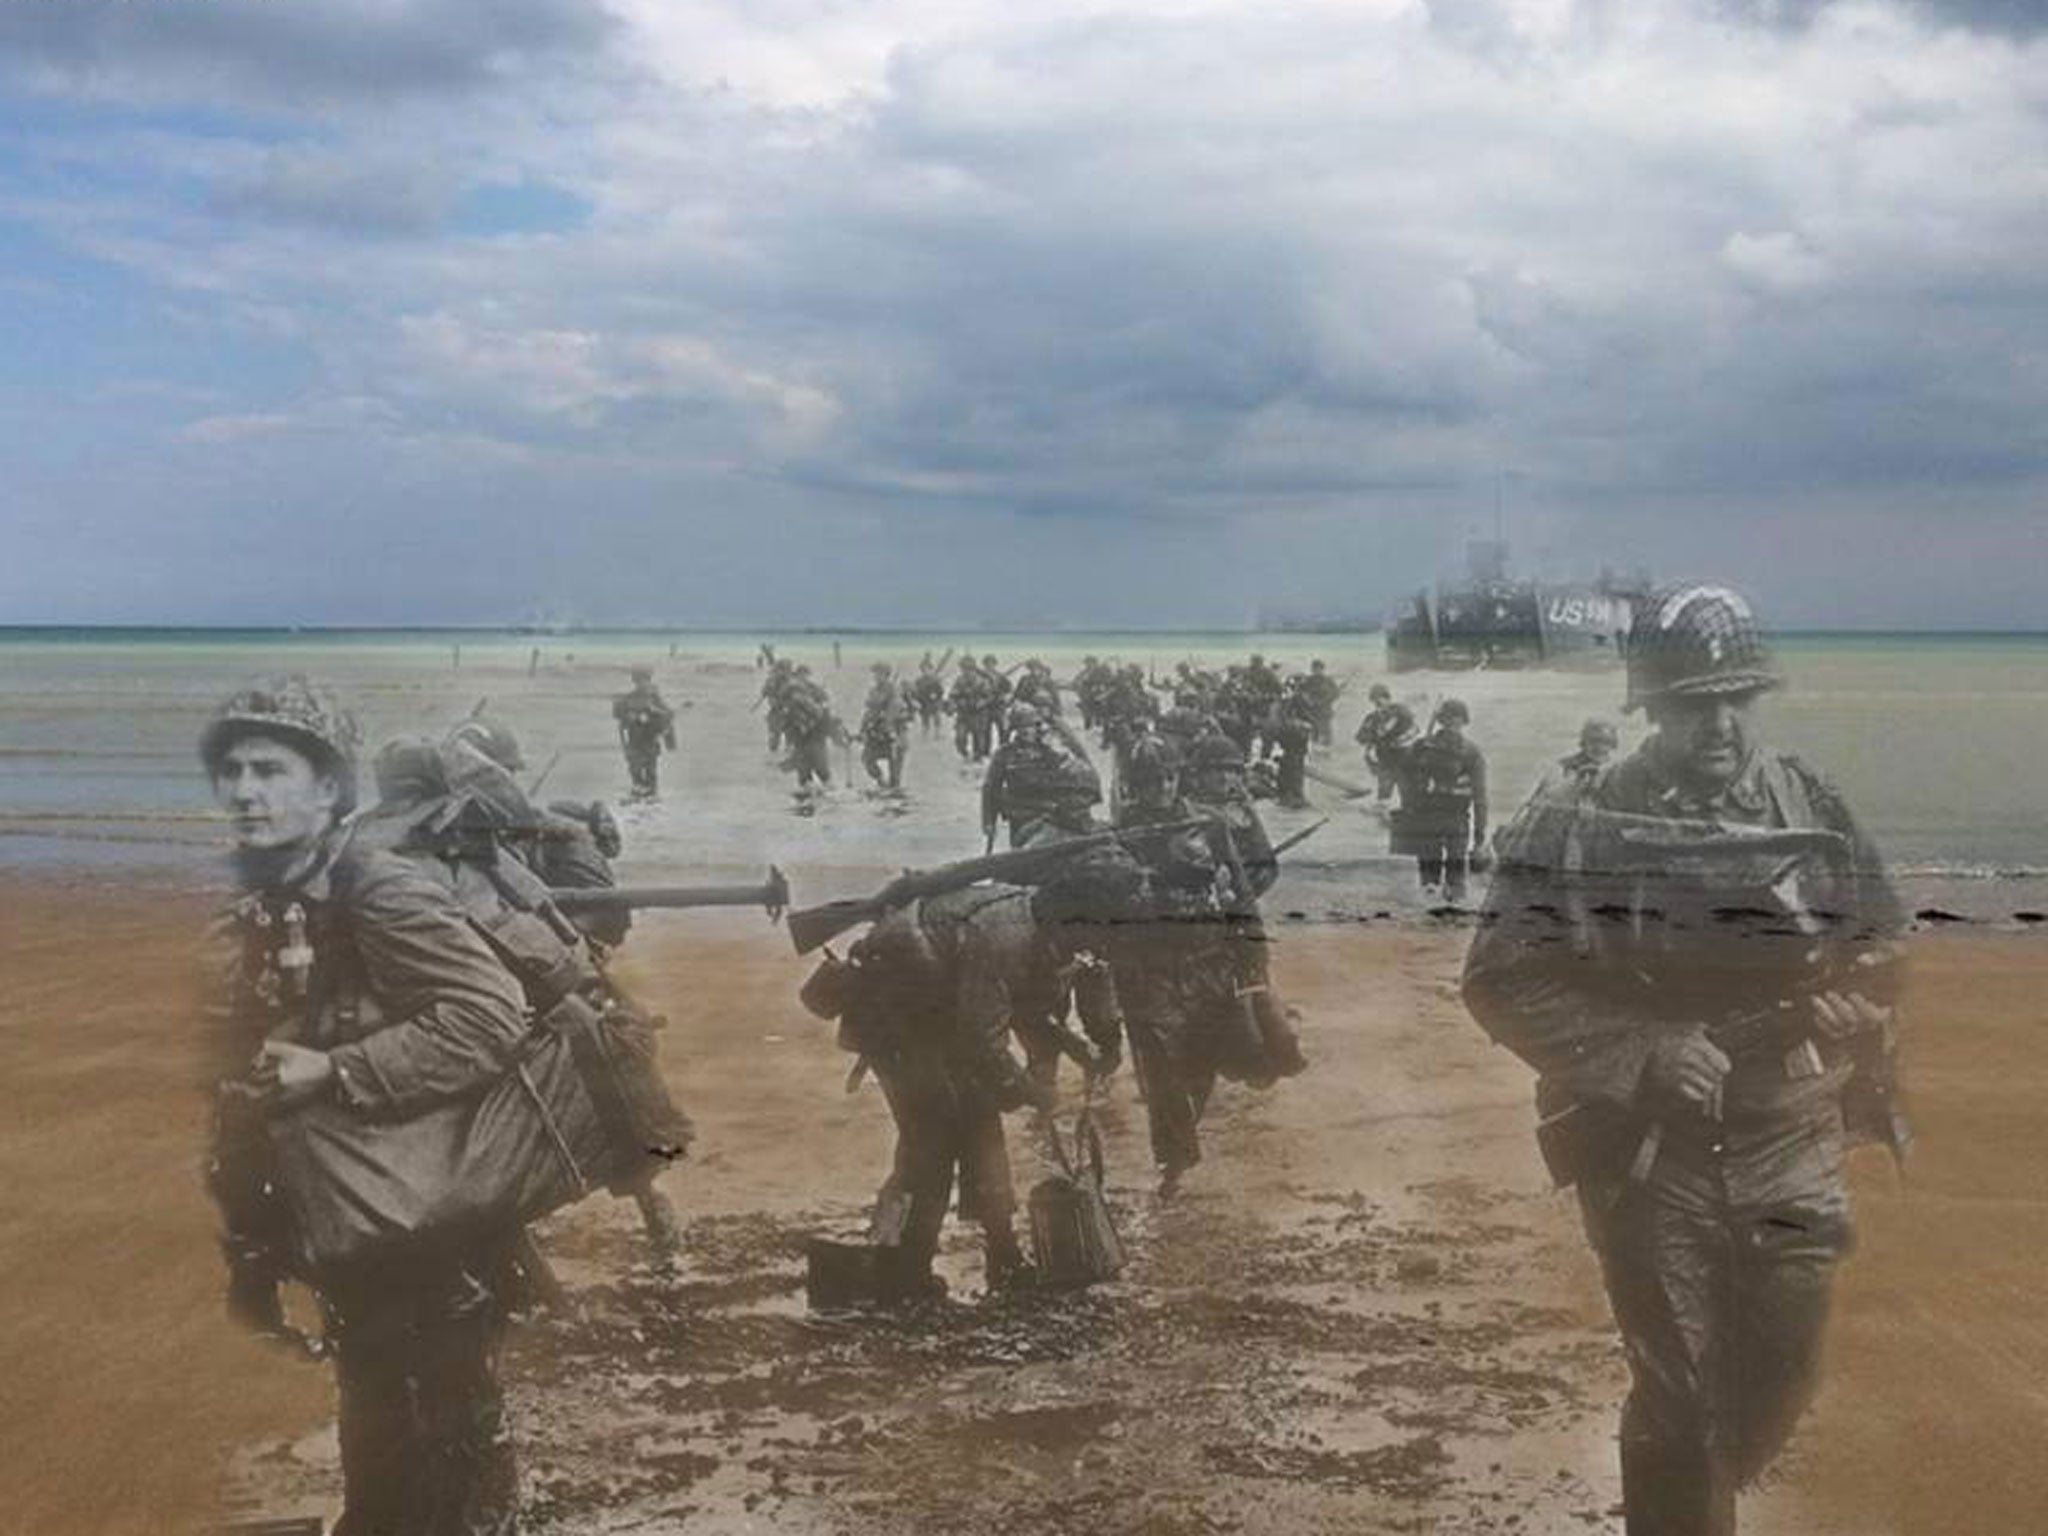 Landing Day: Special engineer brigade landing on Omaha beach D-Day afternoon 1944 – 2014